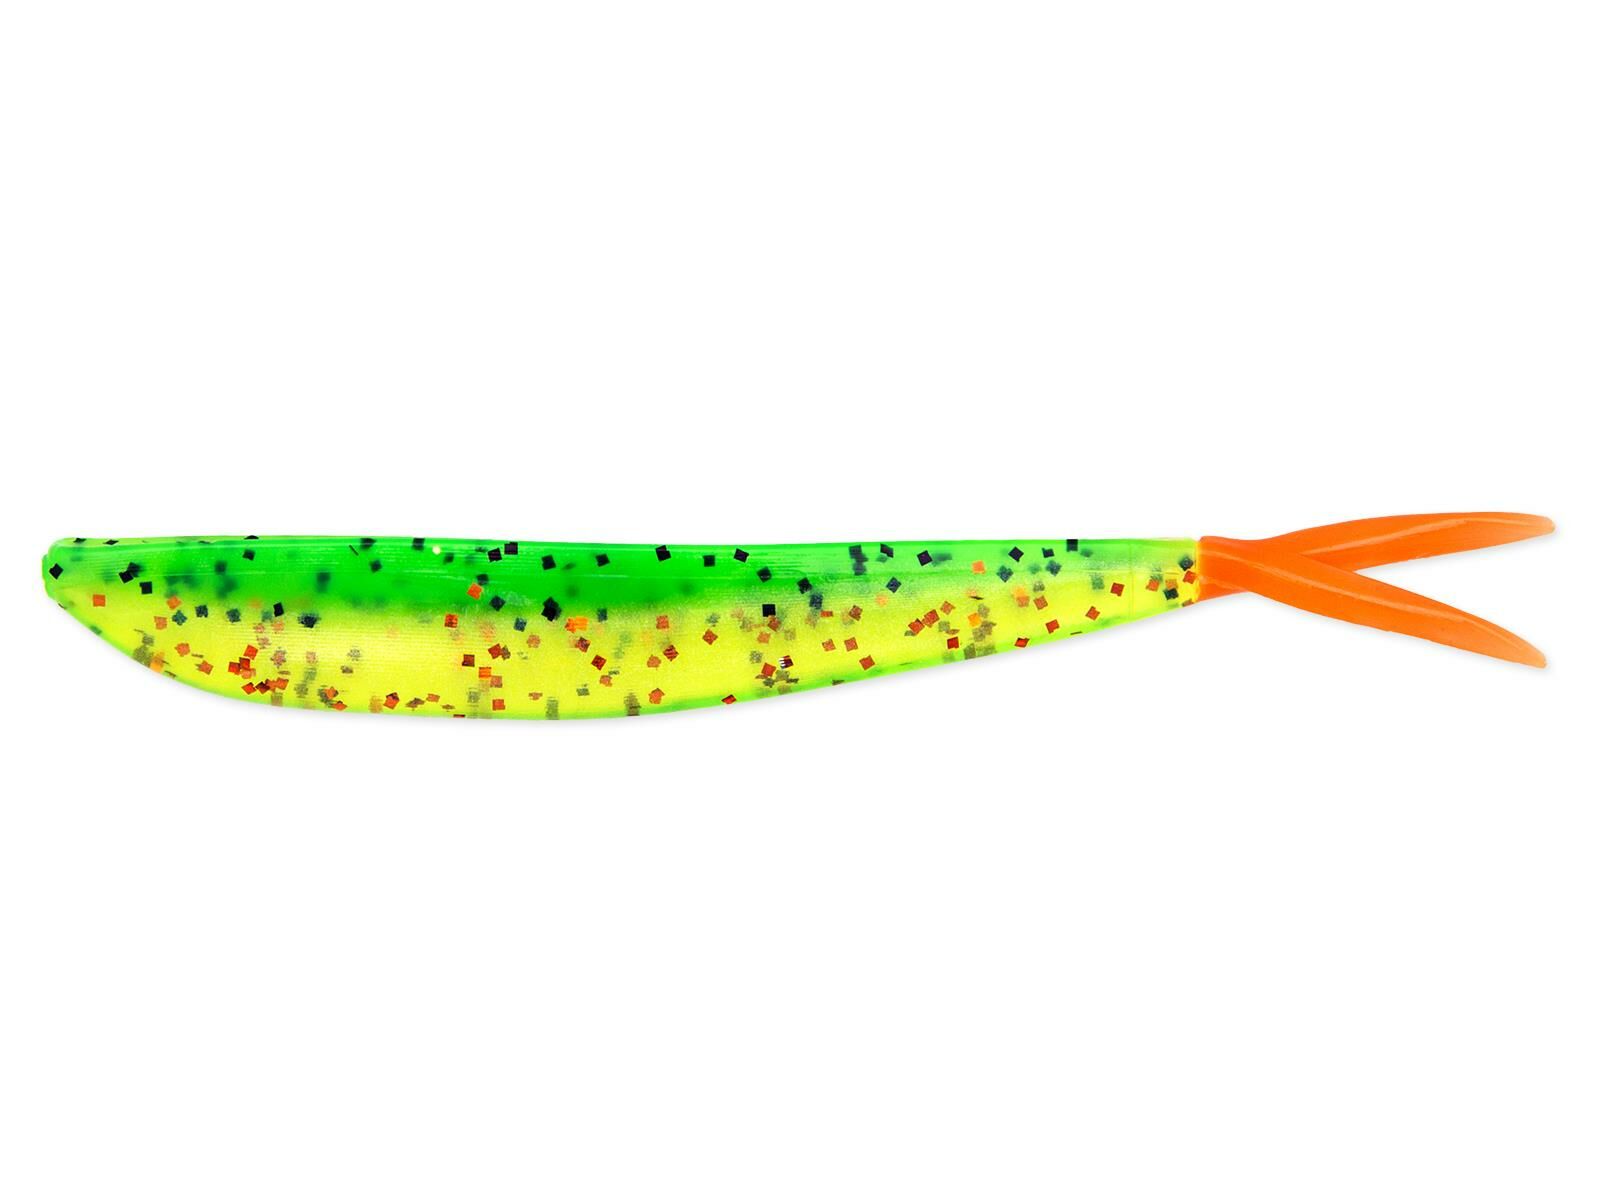 4" Fin-S Fish (Tail Colors) - Fire Tiger FT